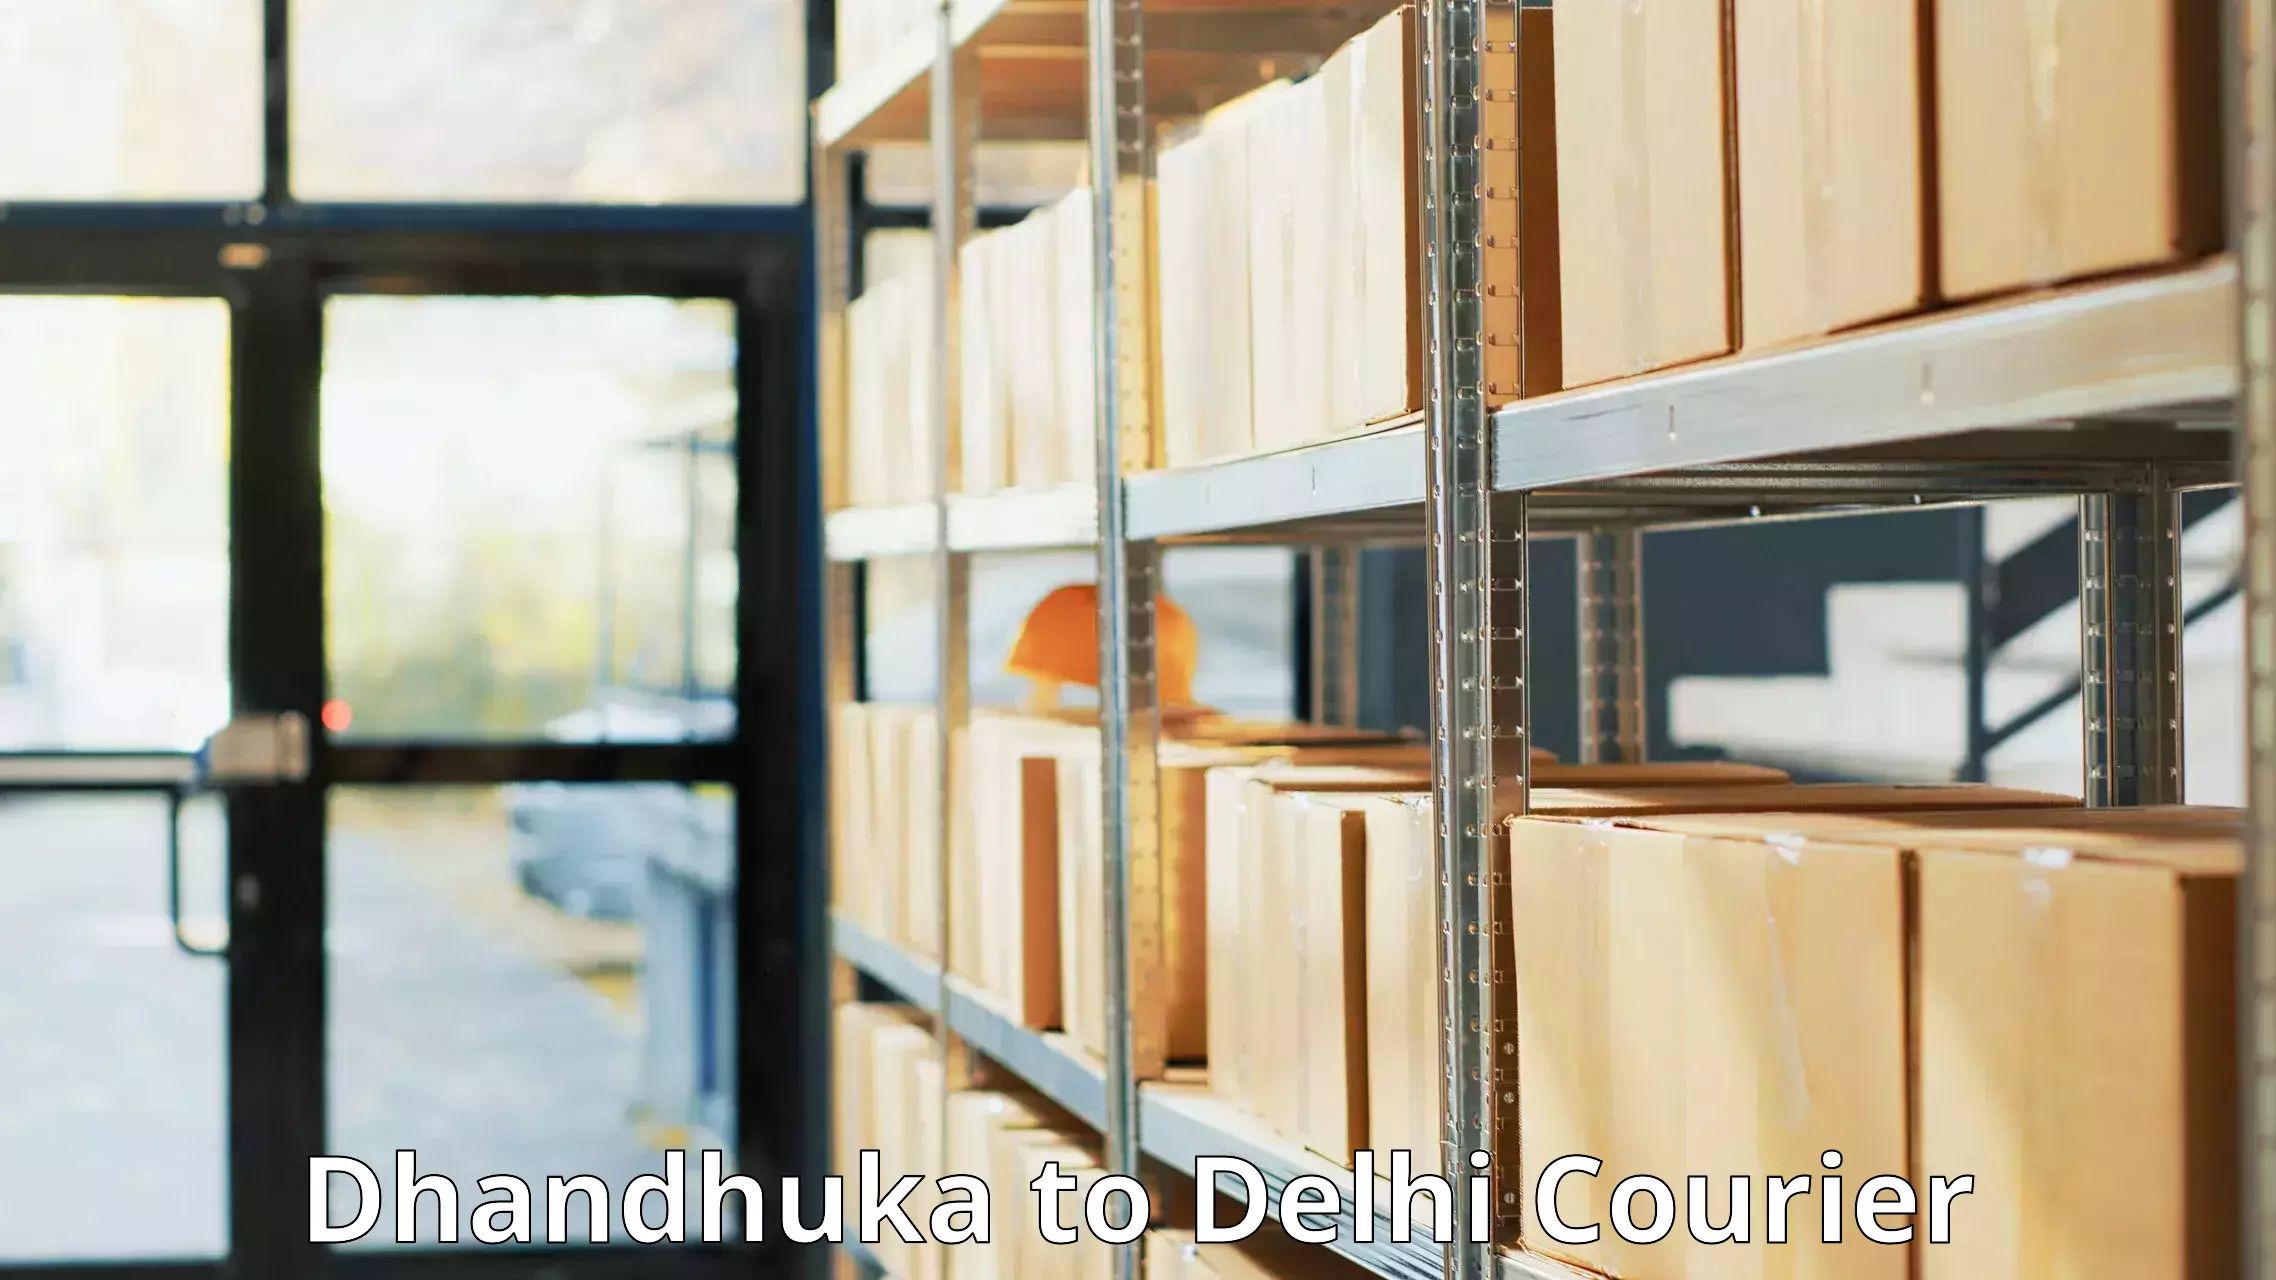 End-to-end delivery Dhandhuka to Delhi